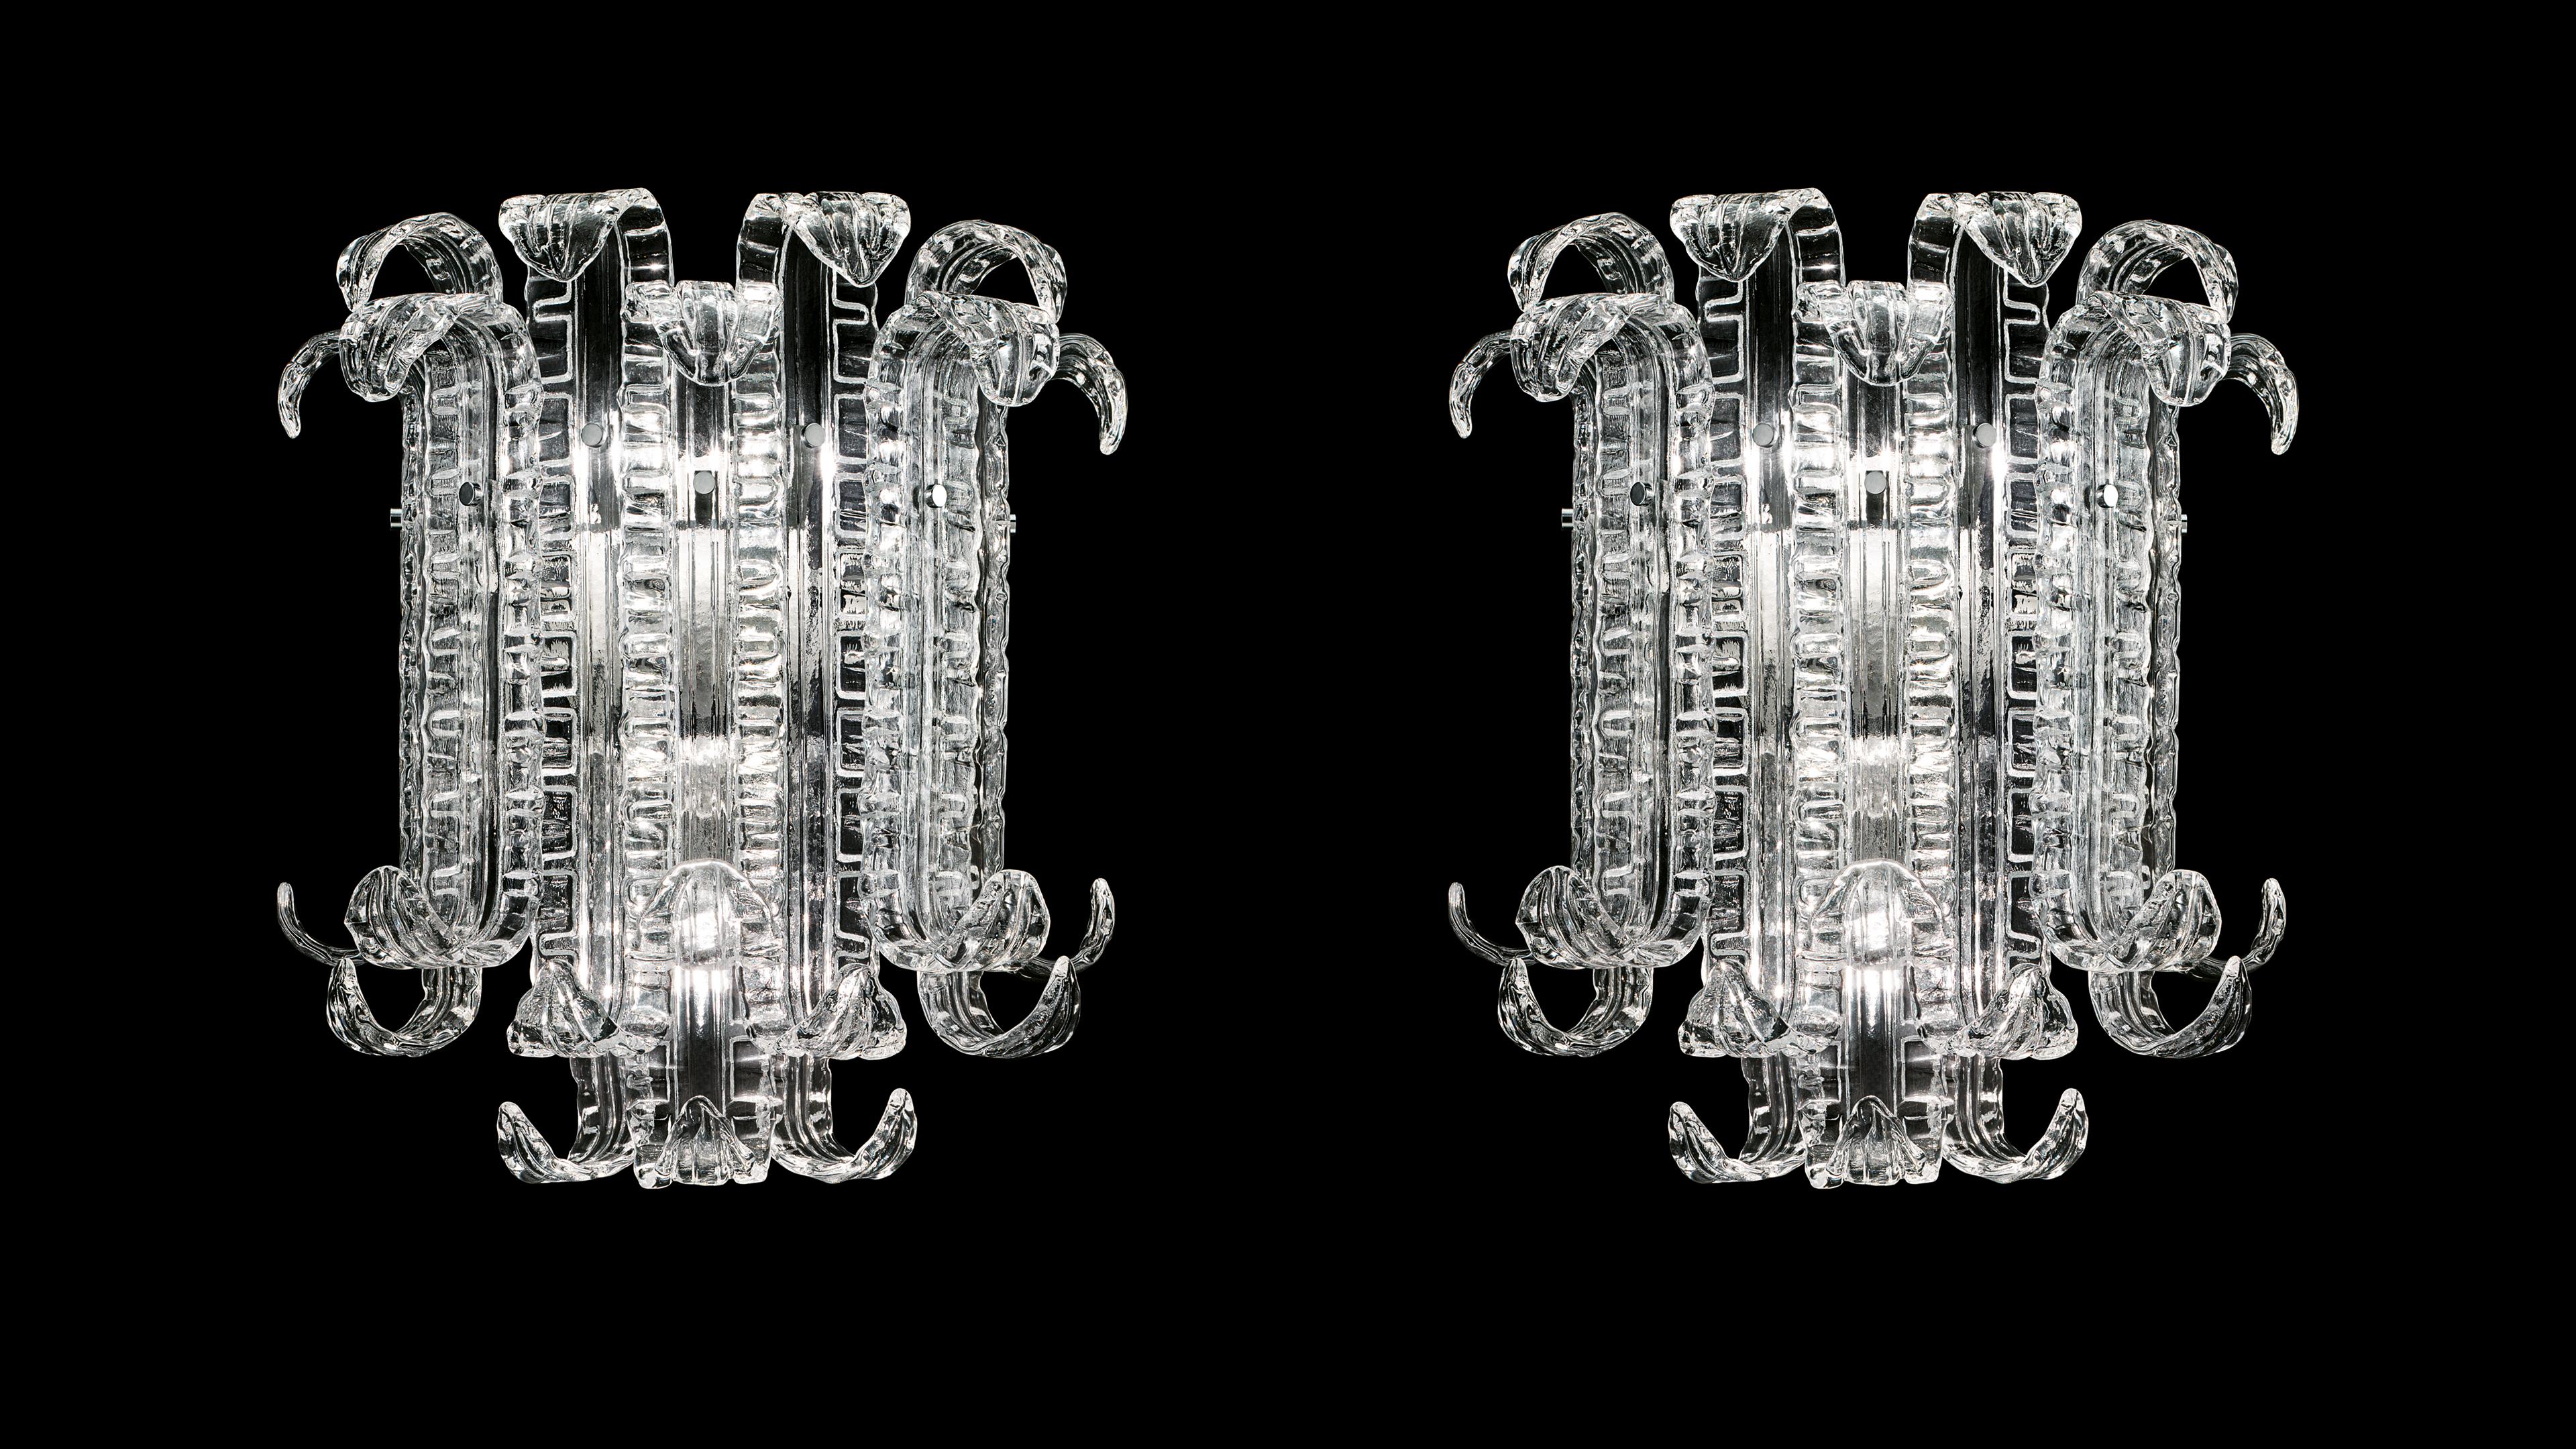 The new Felci is an almost total redesign of a historic Barovier&Toso collection, consisting of eight models (two are wall sconces) and also suitable for all the very large interiors like hotels. Various sizes, able to even satisfy the requirements